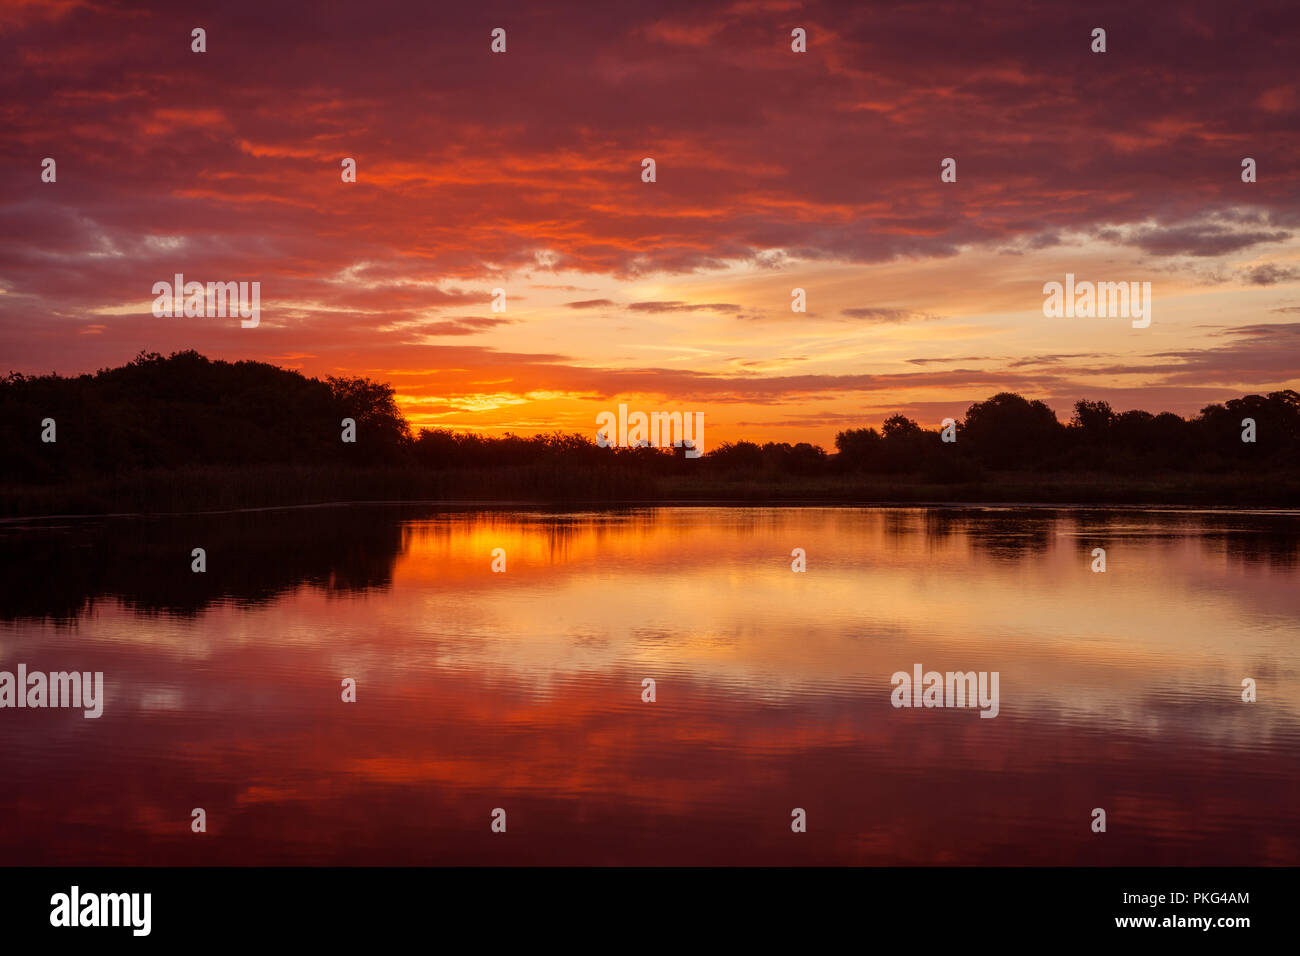 Barton-upon-Humber. 13th Sep 2018. UK Weather: A beautiful sunrise over the Lincolnshire Wildlife Trust's 'Far Ings National Nature Reserve' at Barton-upon-Humber, North Lincolnshire, UK. 13th September 2018. Credit: LEE BEEL/Alamy Live News Stock Photo